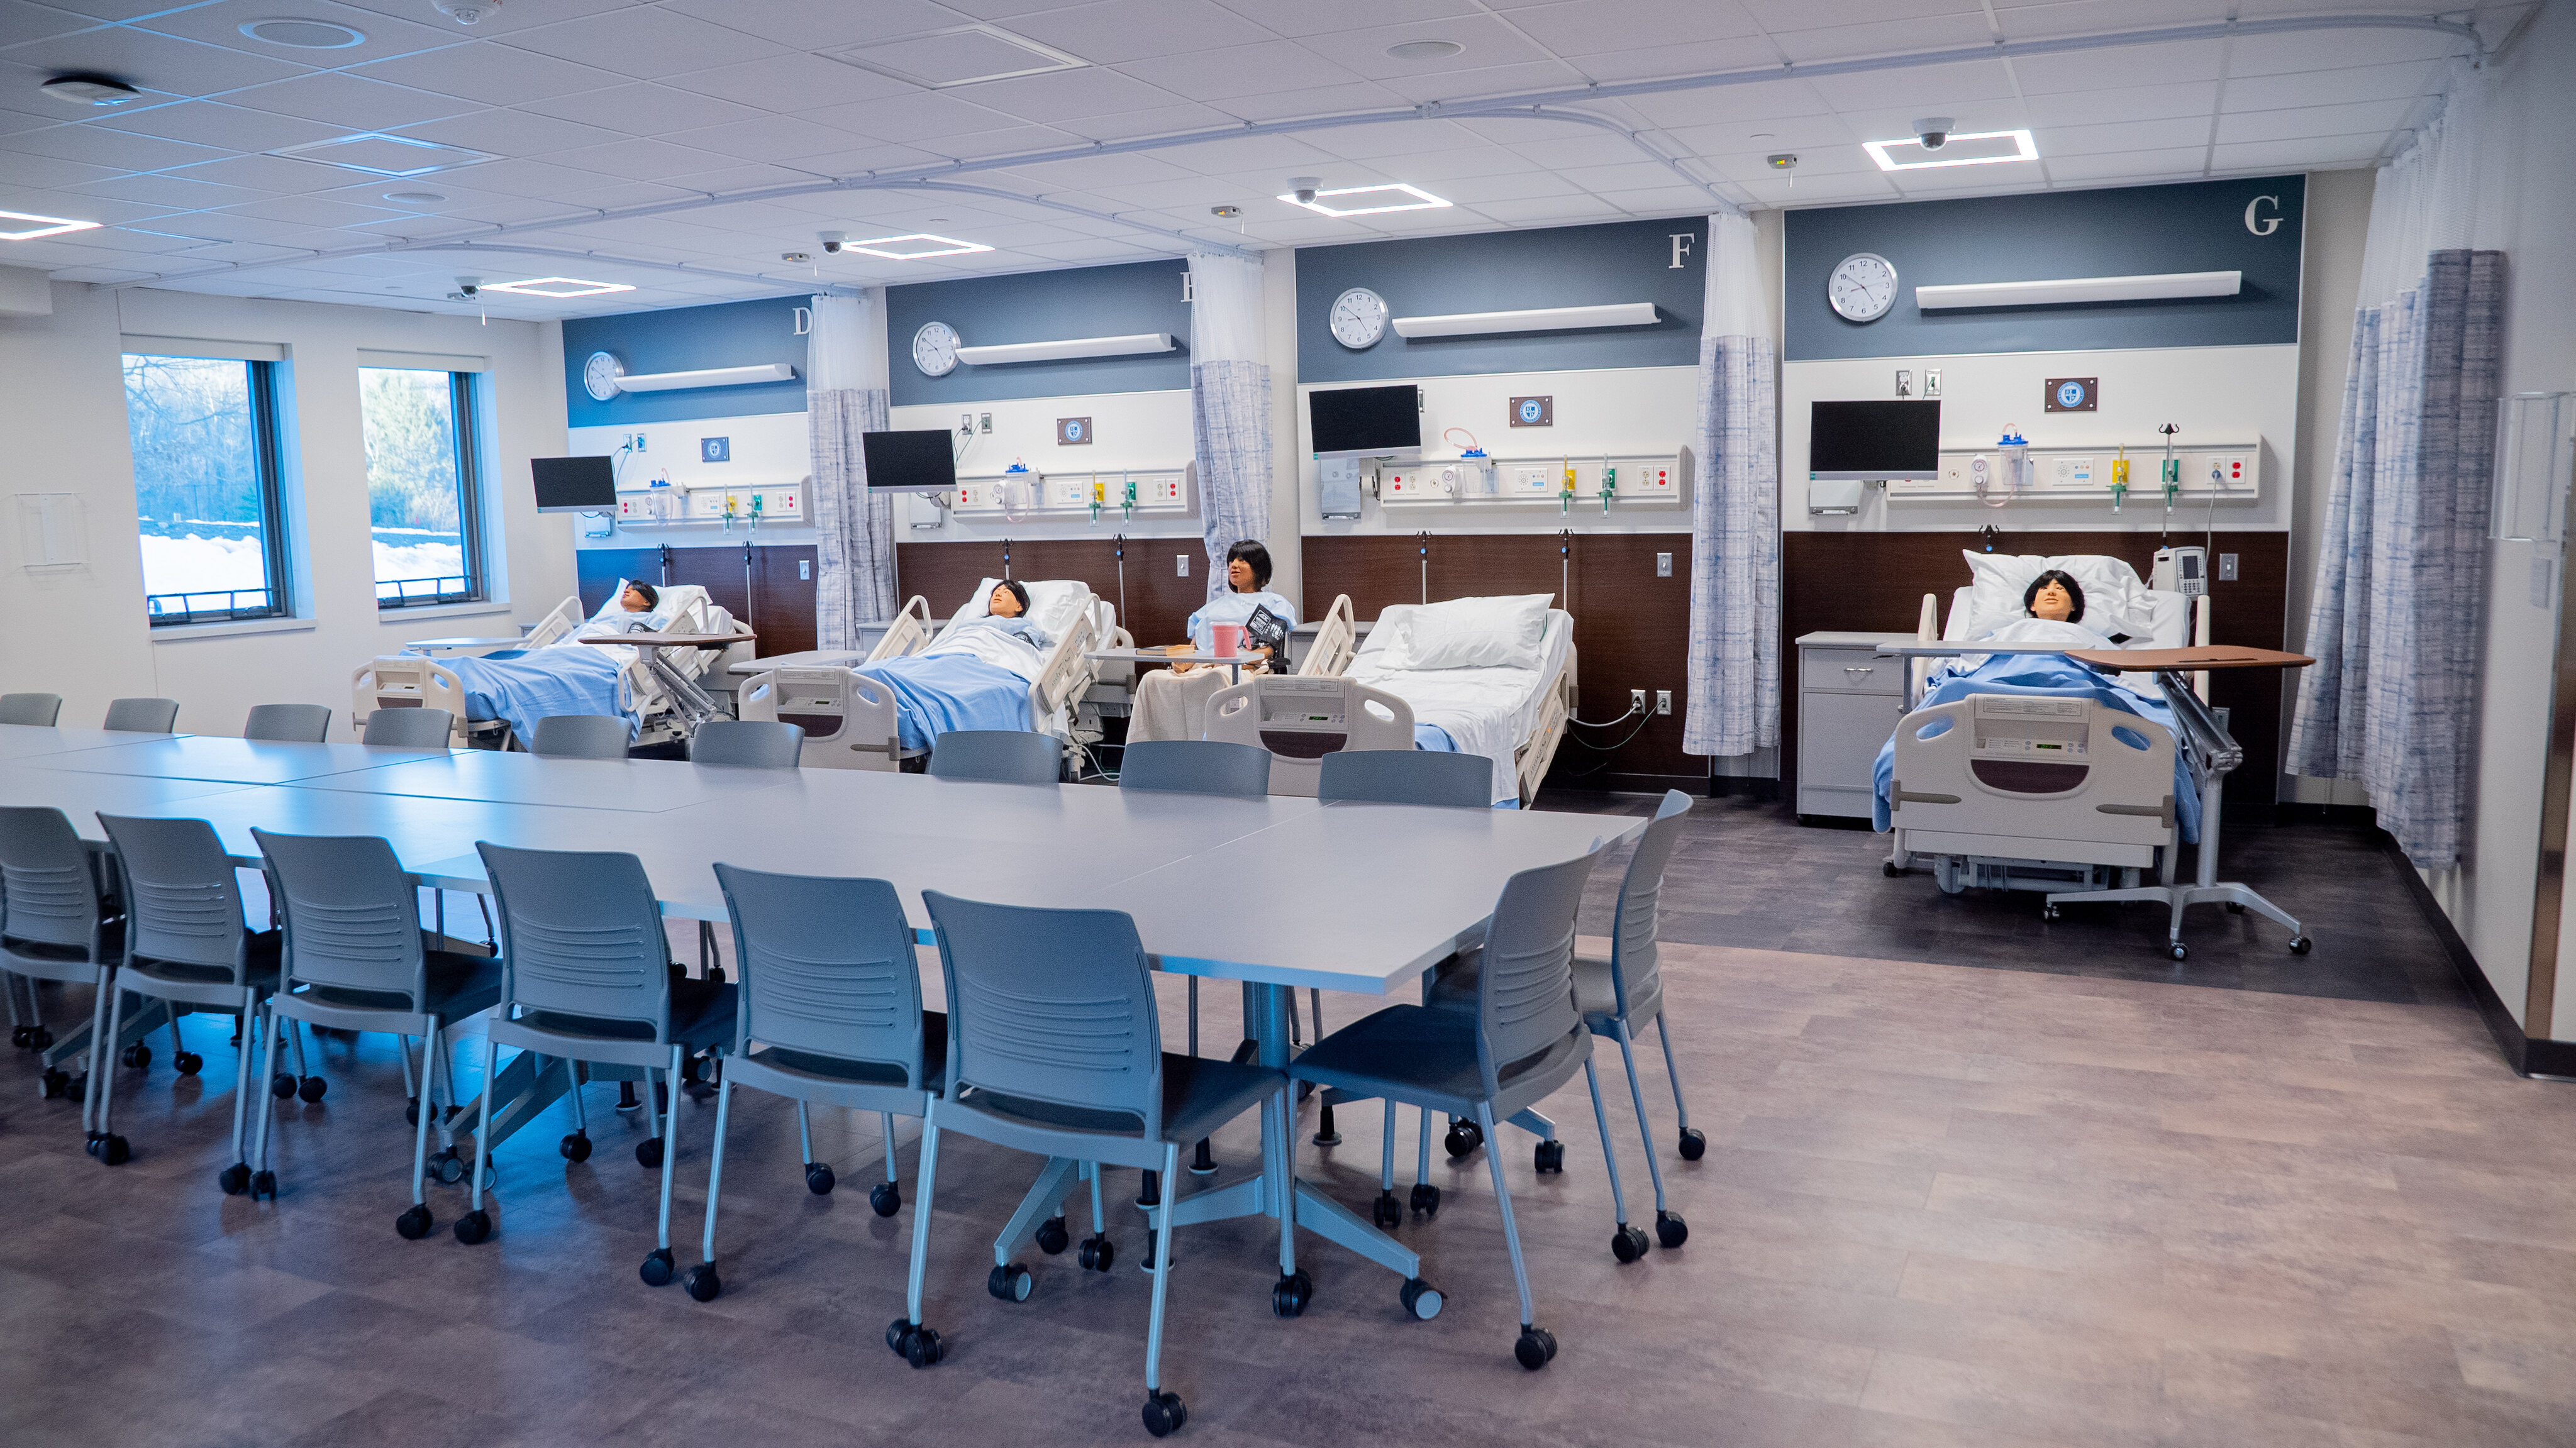 Simulaiton lab in the Froelich School of Nursing at Assumption University in Worcester, Massachusetts